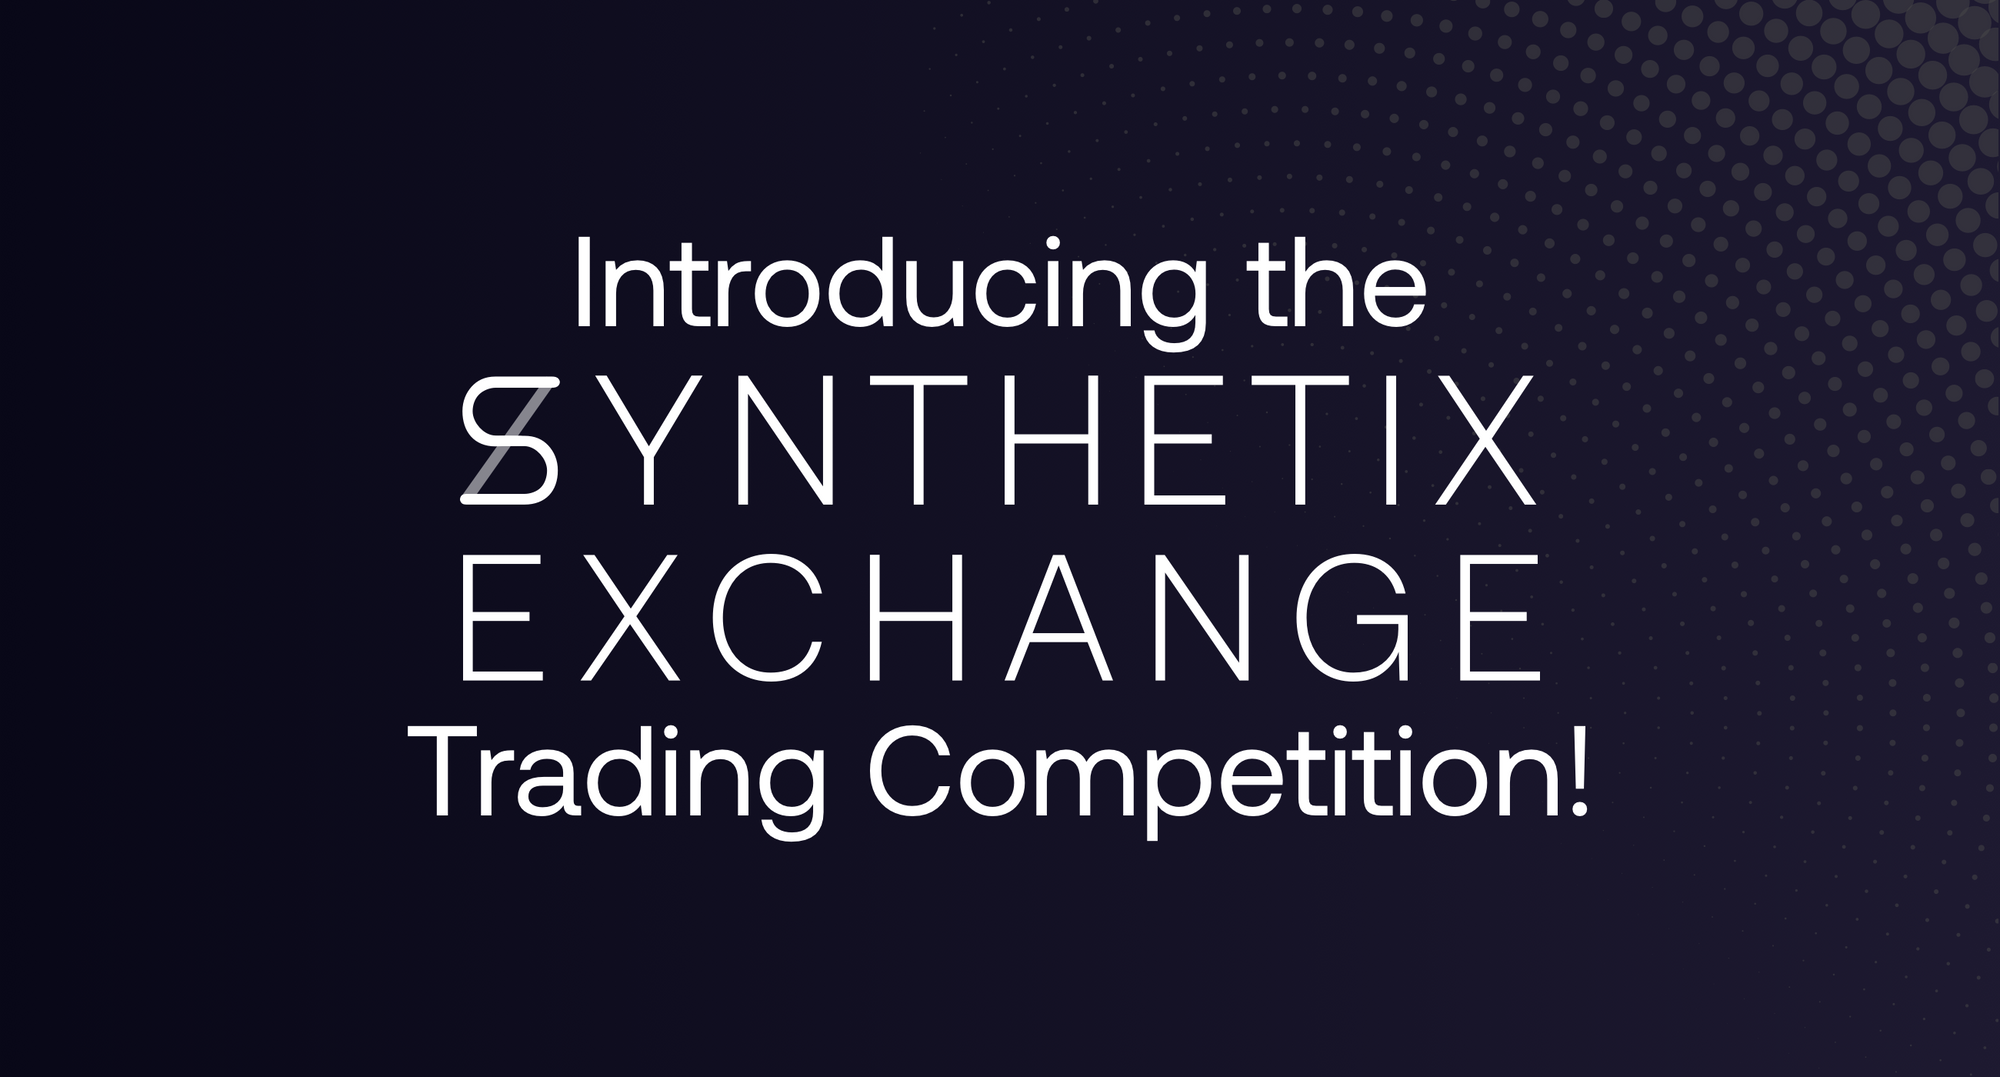 Win a share of 4000 sUSD in our first ever Synthetix.Exchange trading competition!